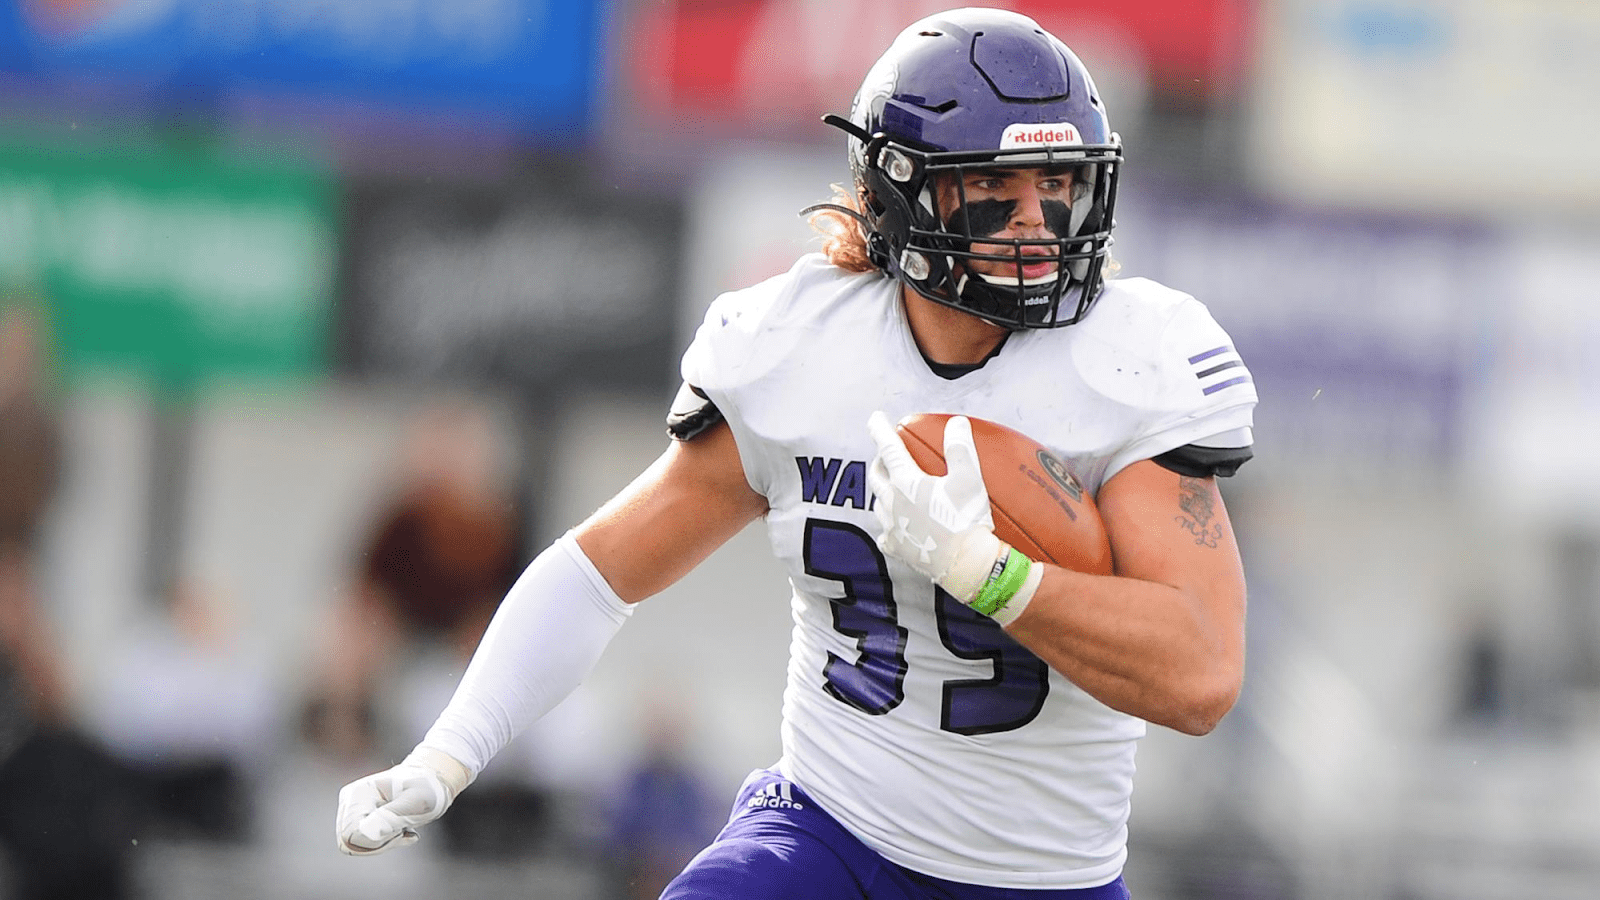 Clay Schueffner is a great run defender for Winona State who exhibits good instincts and quality range. Senior Hula Bowl scout Mike Bey breaks down Schueffner as an NFL Prospect in his report.